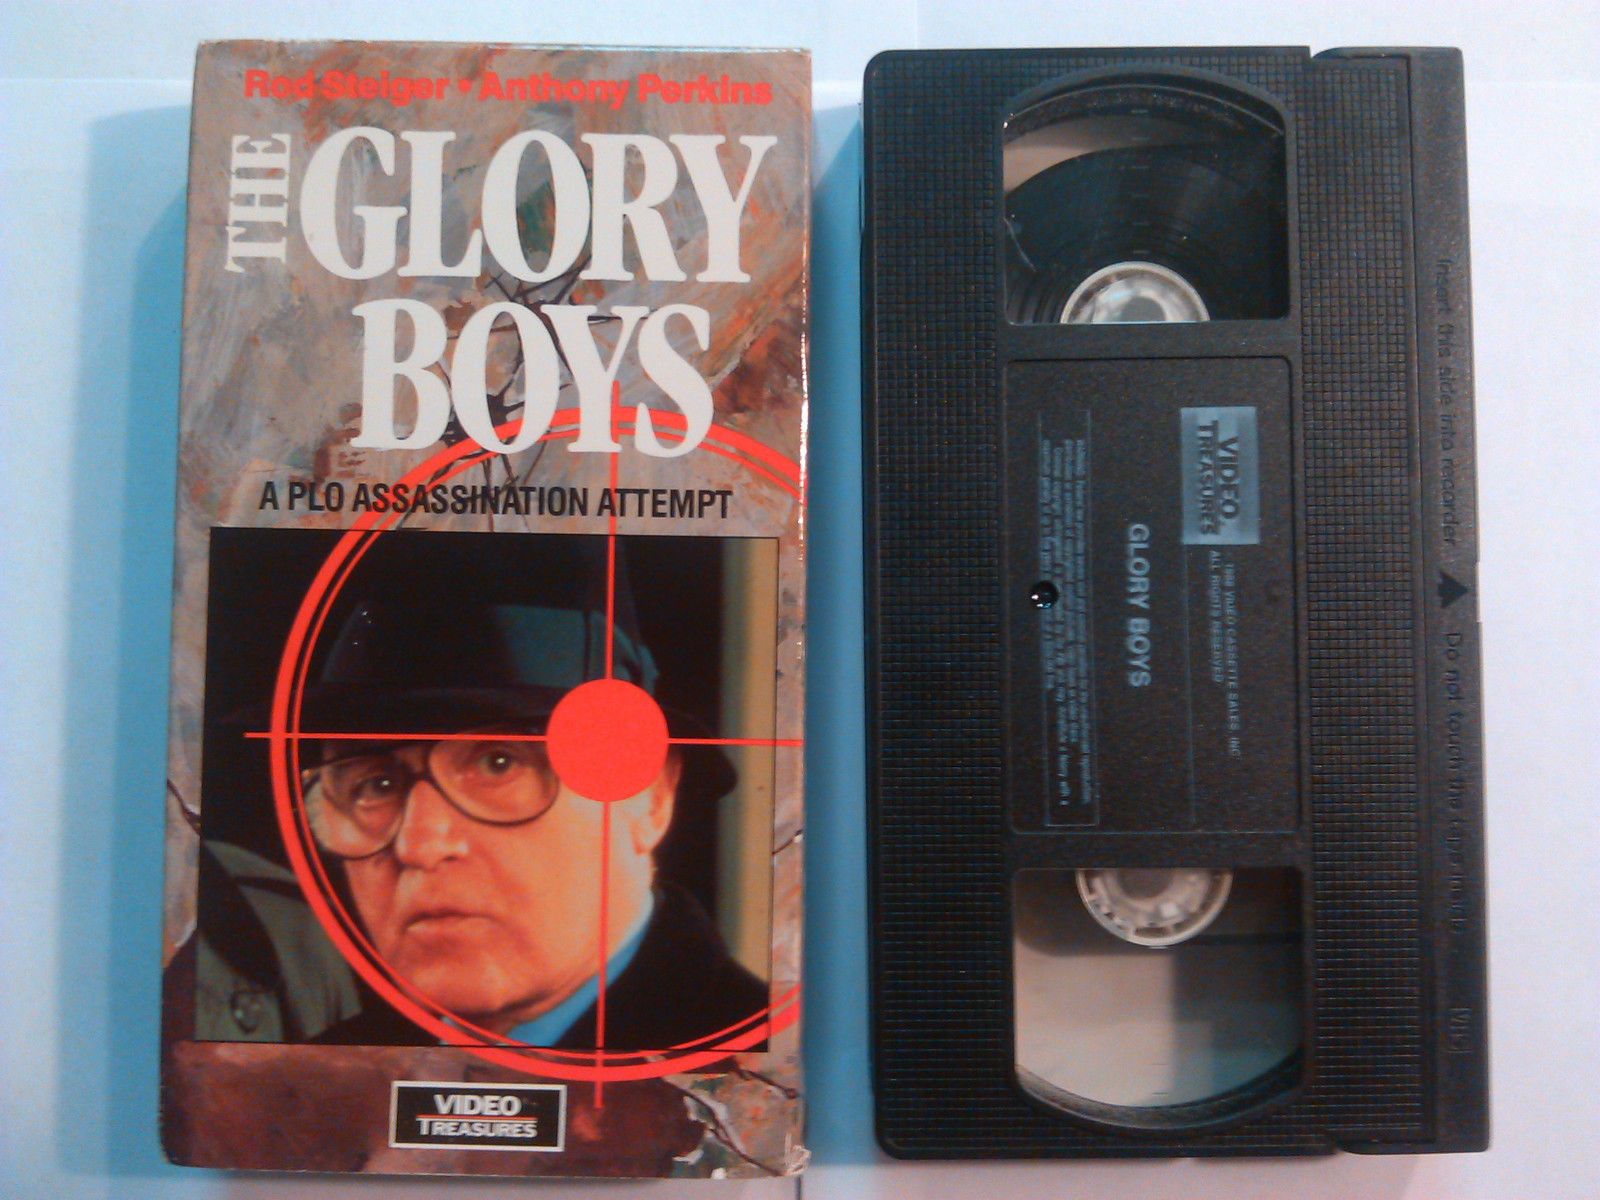 Primary image for The Glory Boys - A PLO ASSASSINATION ATTEMPT [VHS, 1984] Rod Steiger A. Perkins